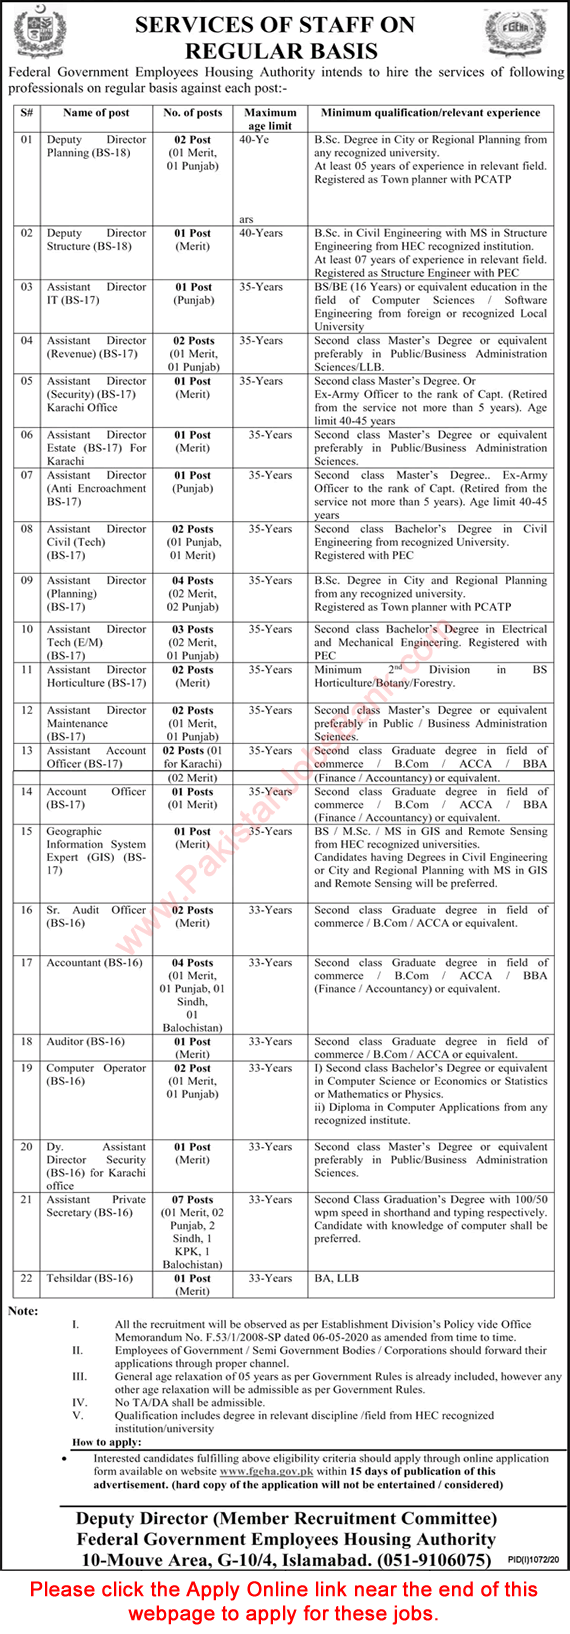 Federal Government Employees Housing Authority Jobs August 2020 FGEHA Apply Online Latest